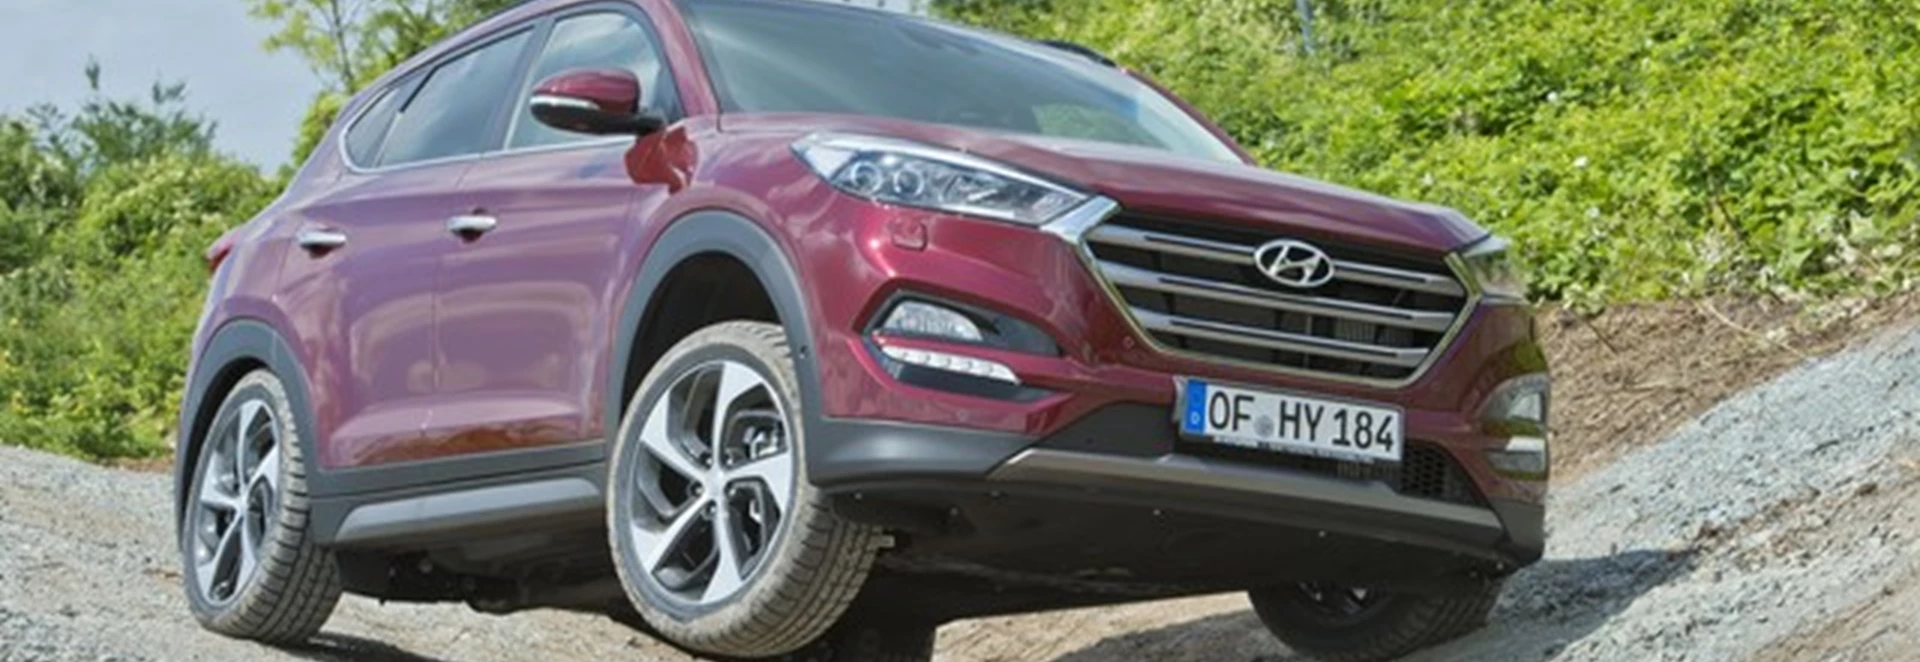 A buyer’s guide to the Hyundai Tucson 